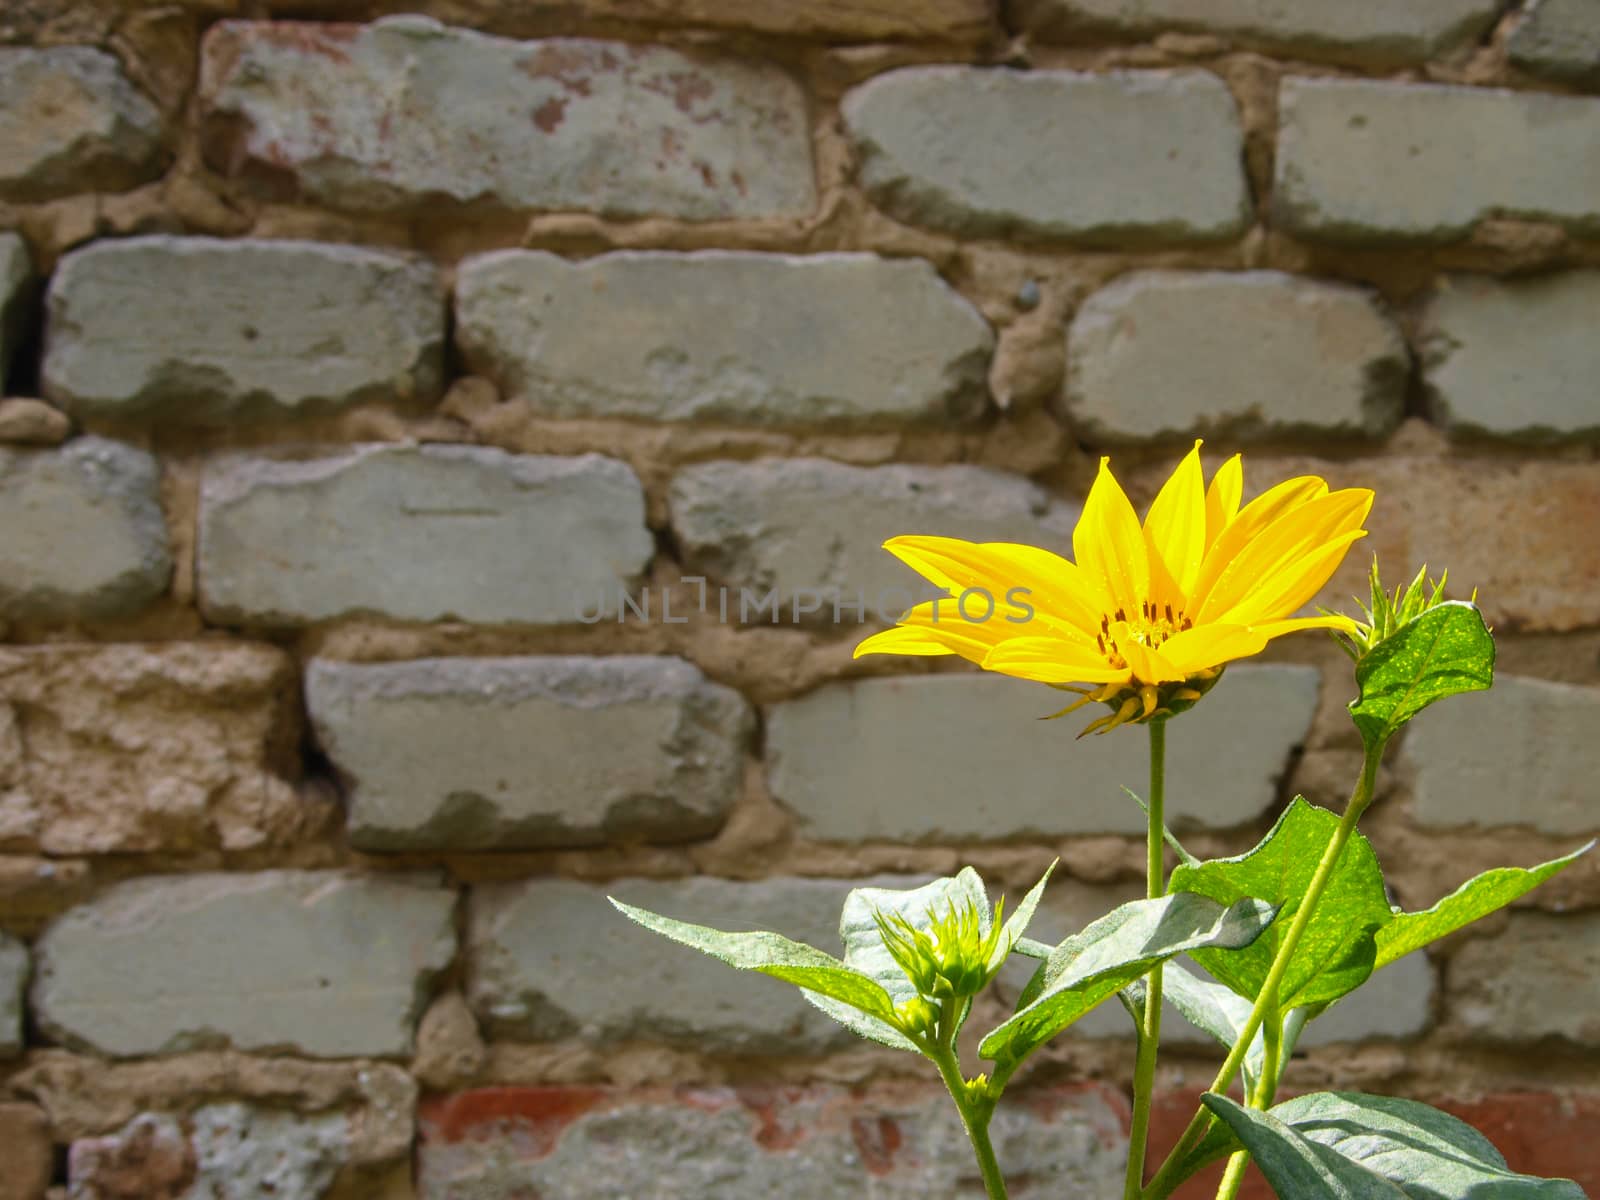 False Sunflower before the old brick wall.